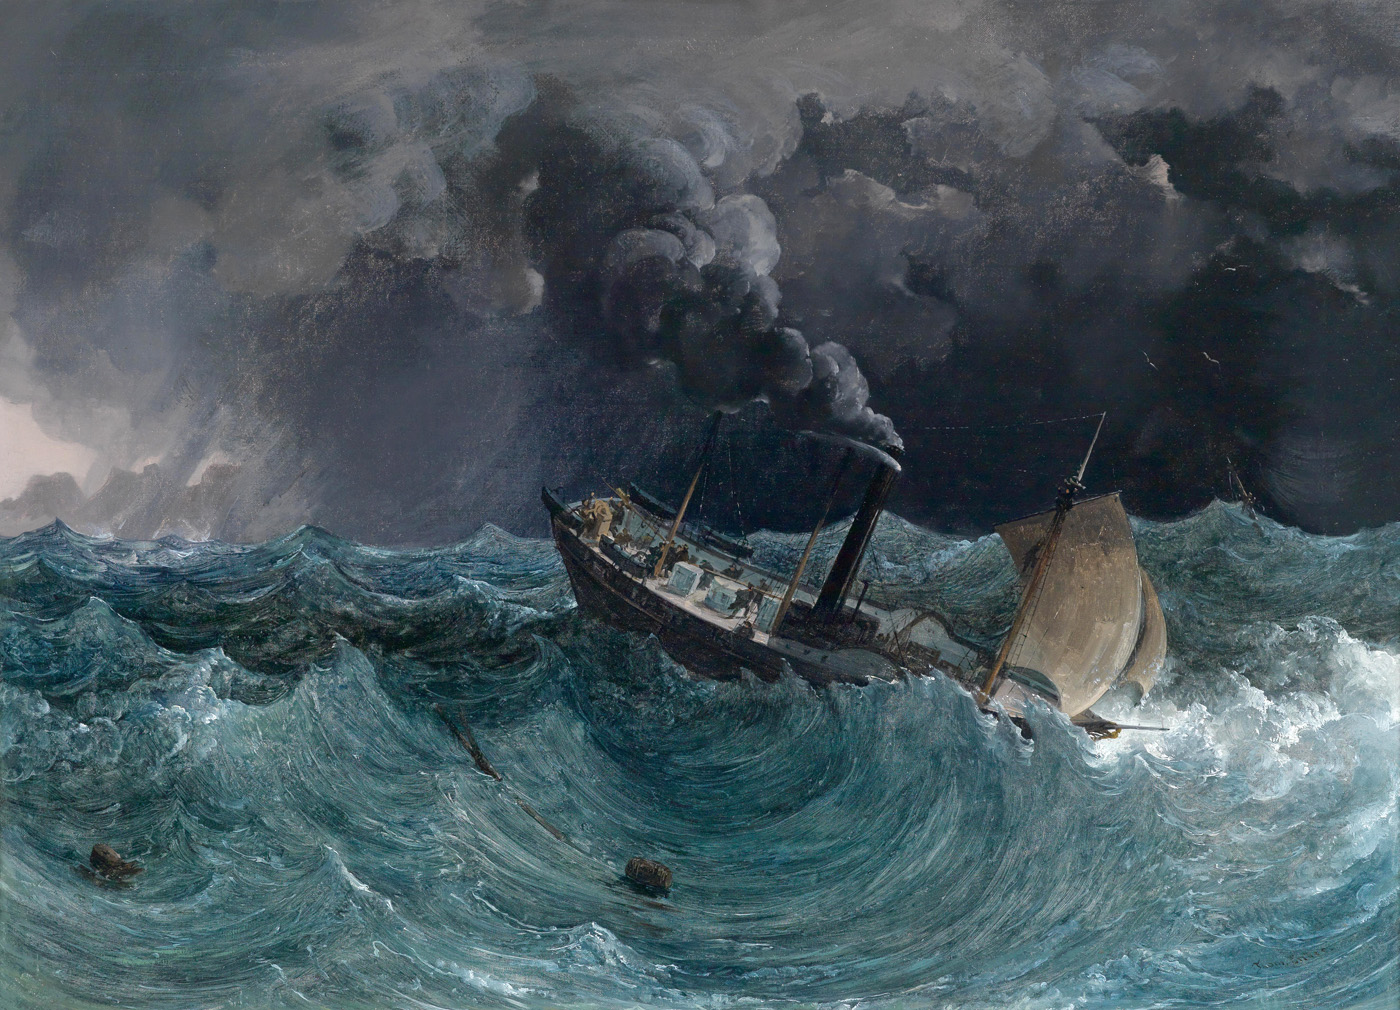 steamship marianne in a storm on the black sea by Thomas Ender